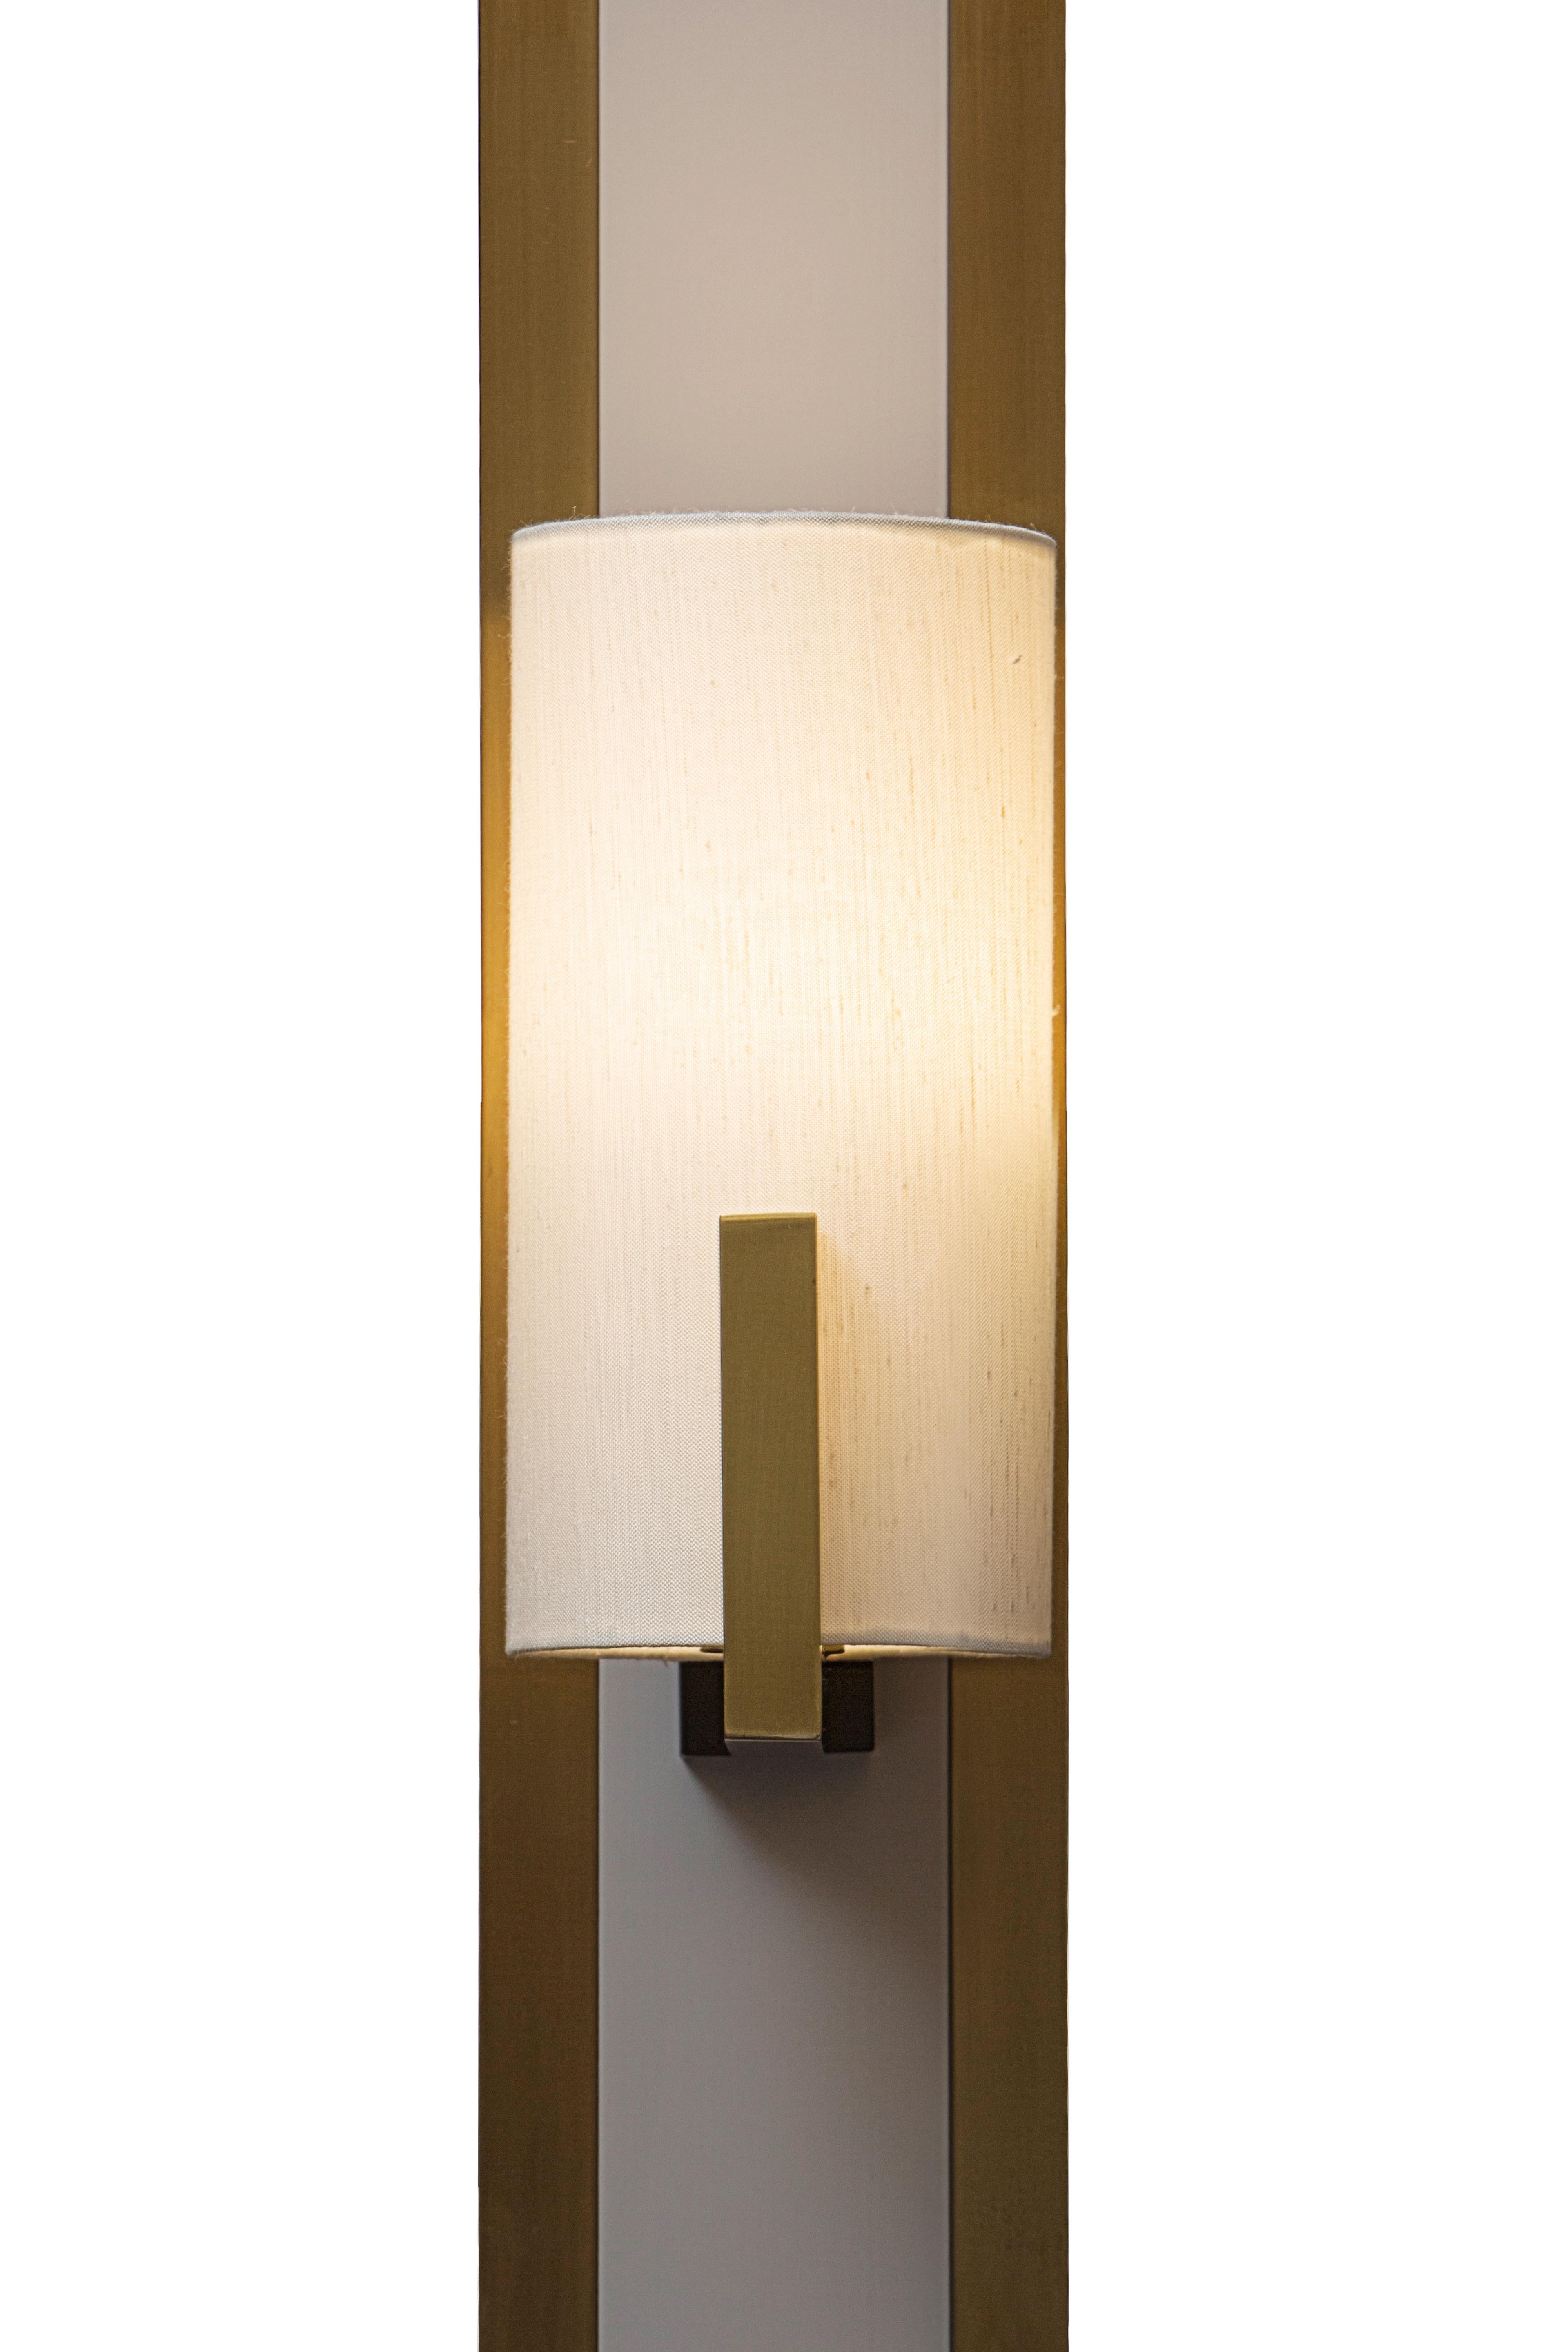 The linear design of this elegant sconce is inspired by the nostalgic and romance-filled Los Angeles of the 1930s, with its Cafe Society atmosphere. The sophisticated silhouette of the piece is made of a brass structure covered with shantung silk